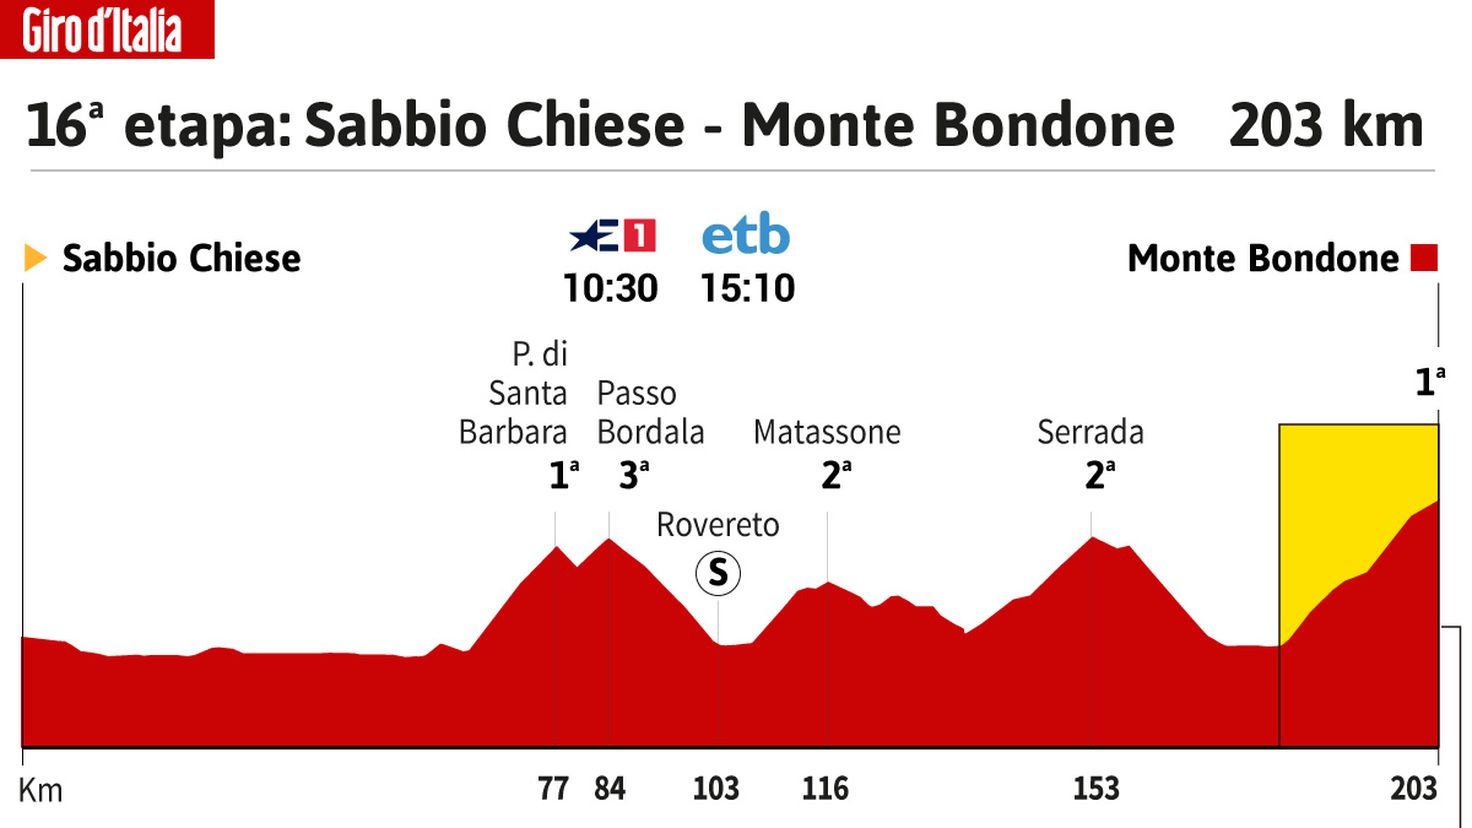 Giro d'Italia today, stage 16: schedule, profile and route
